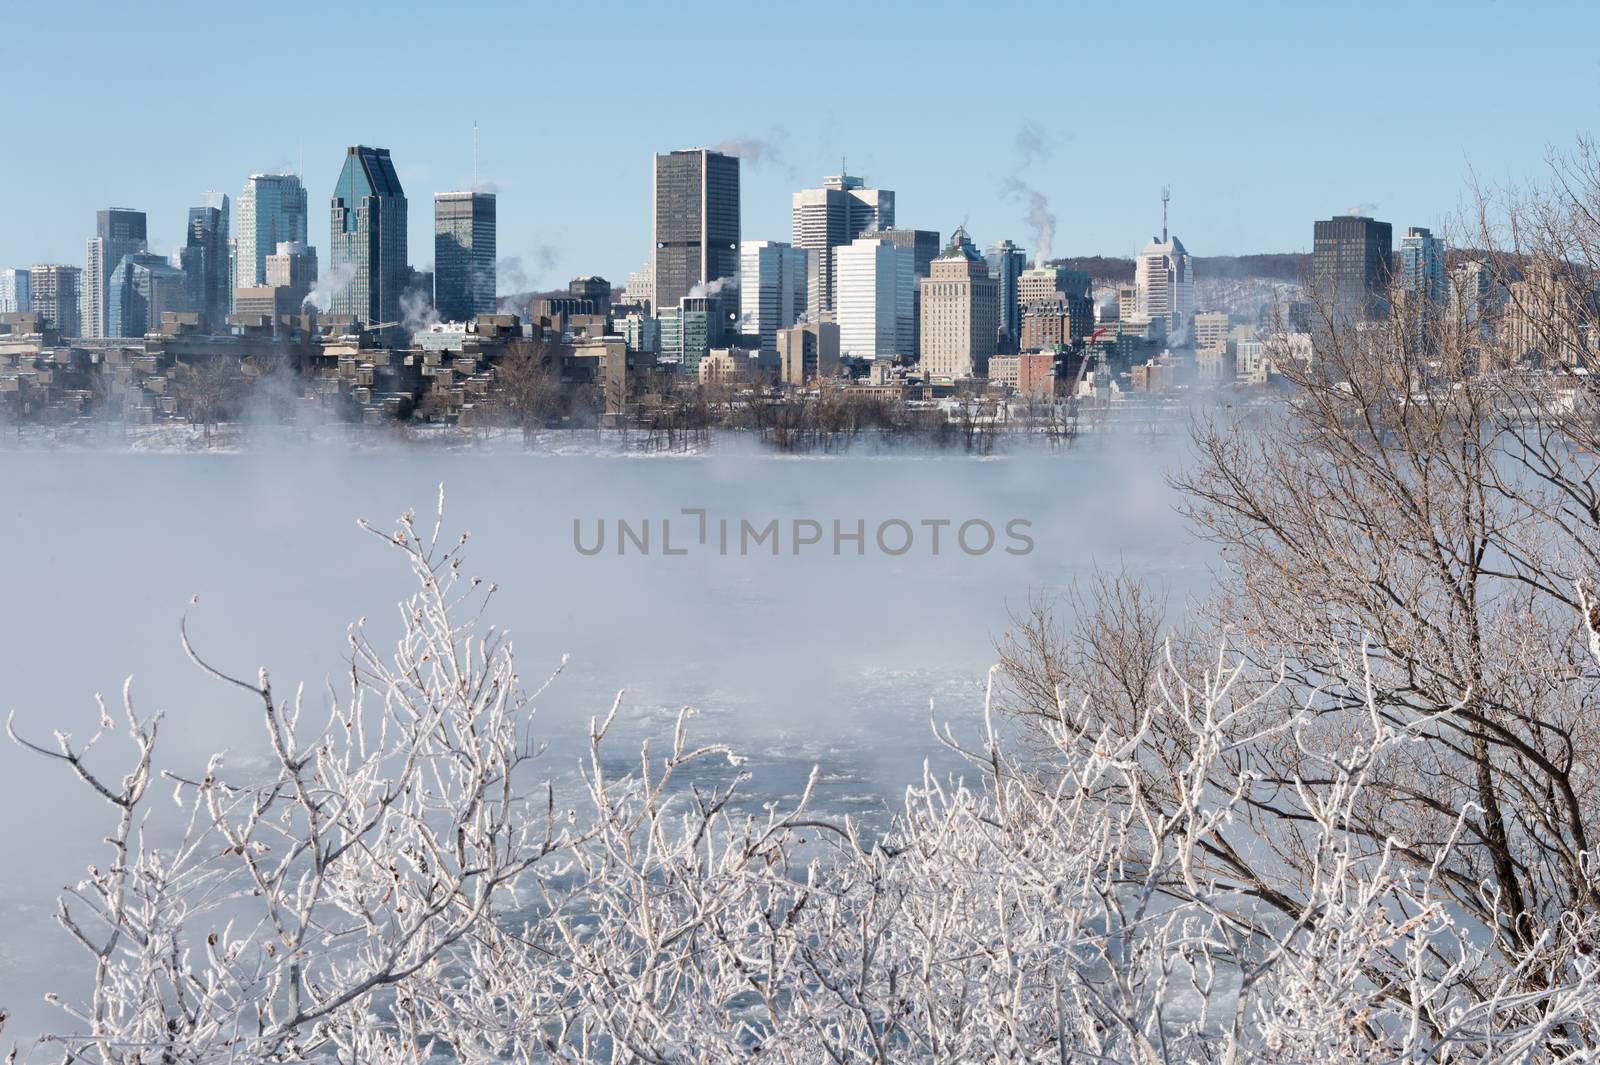 Montreal, CA - 1 January 2018: Montreal Skyline in winter as ice fog rises off the St. Lawrence River